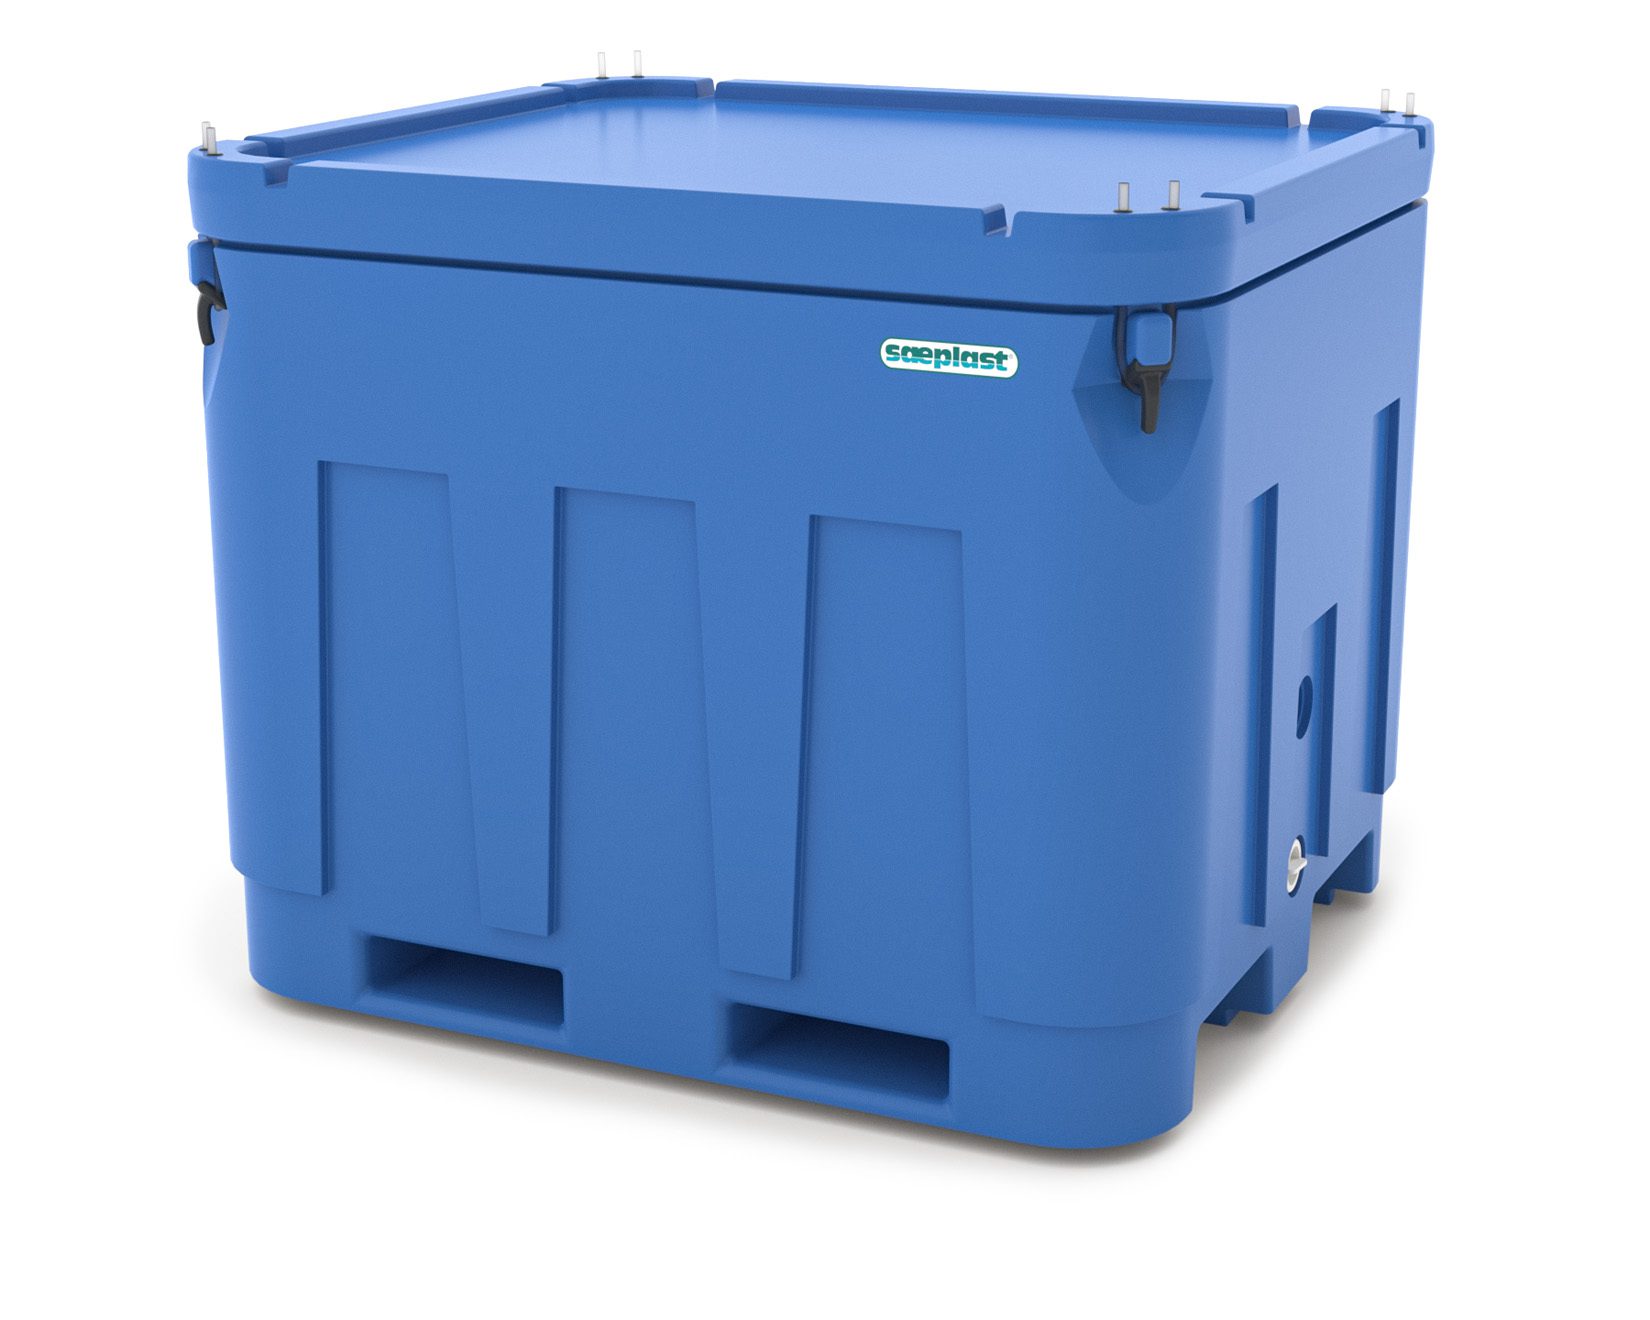 The Saeplast DX332 insulated plastic container